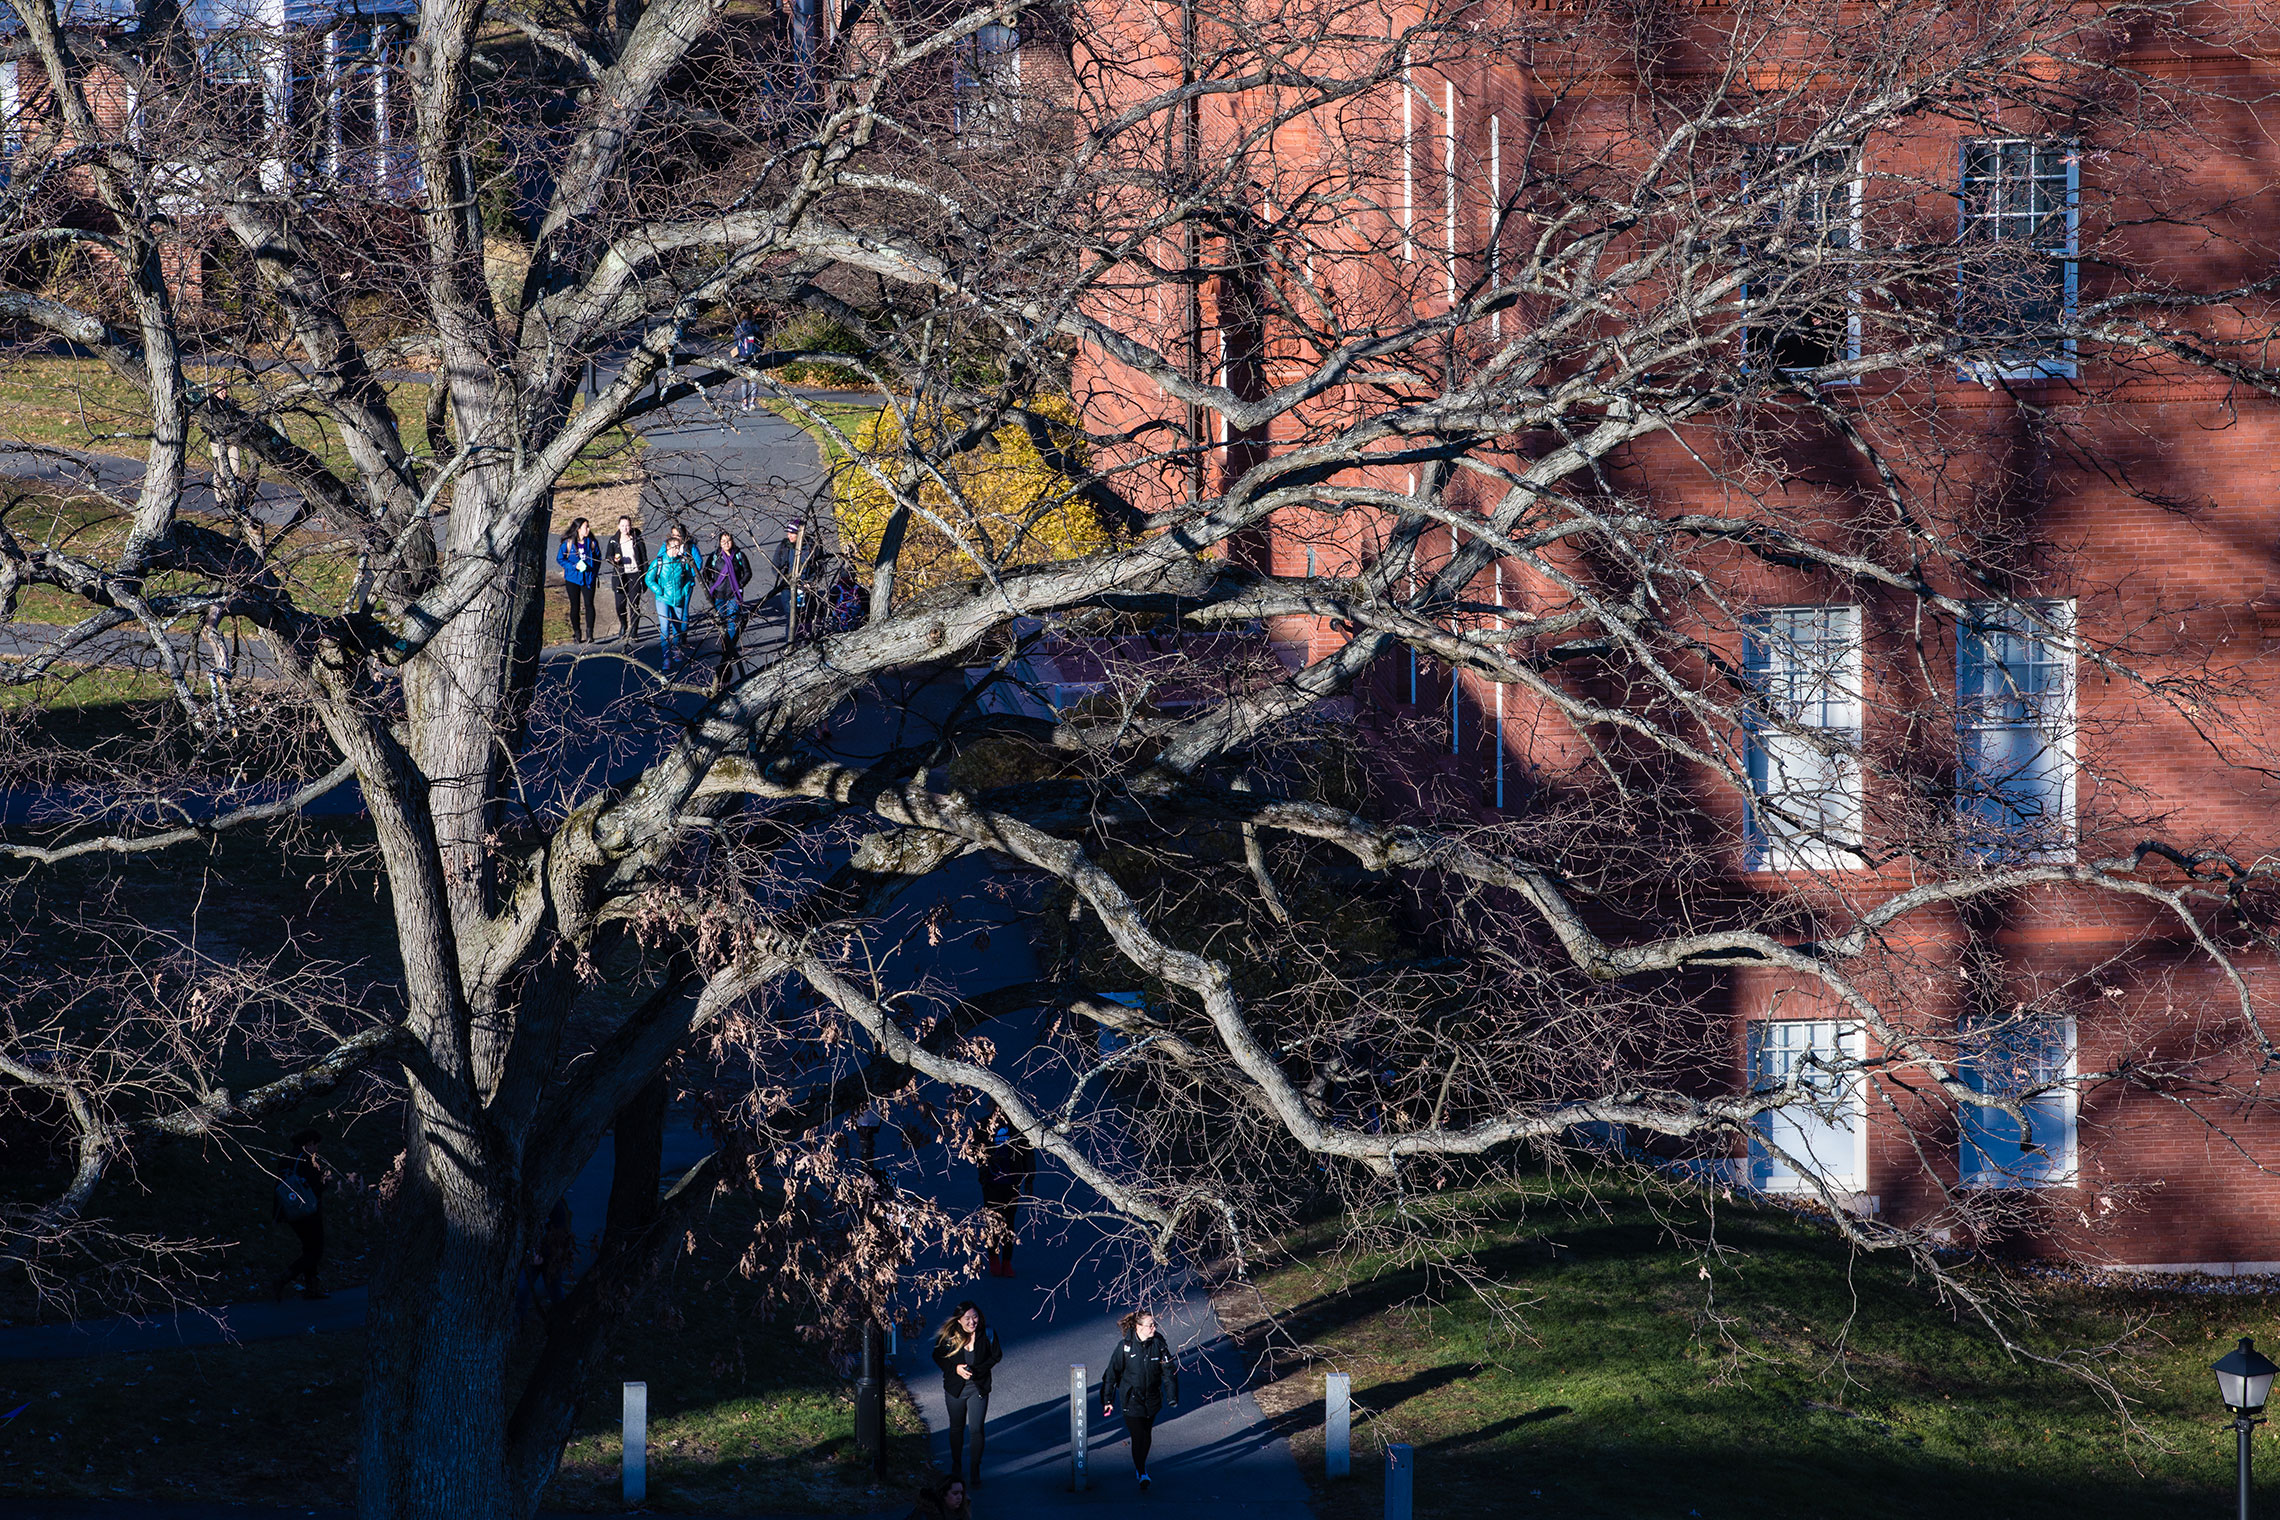 A fall day on the campus of Amherst College.